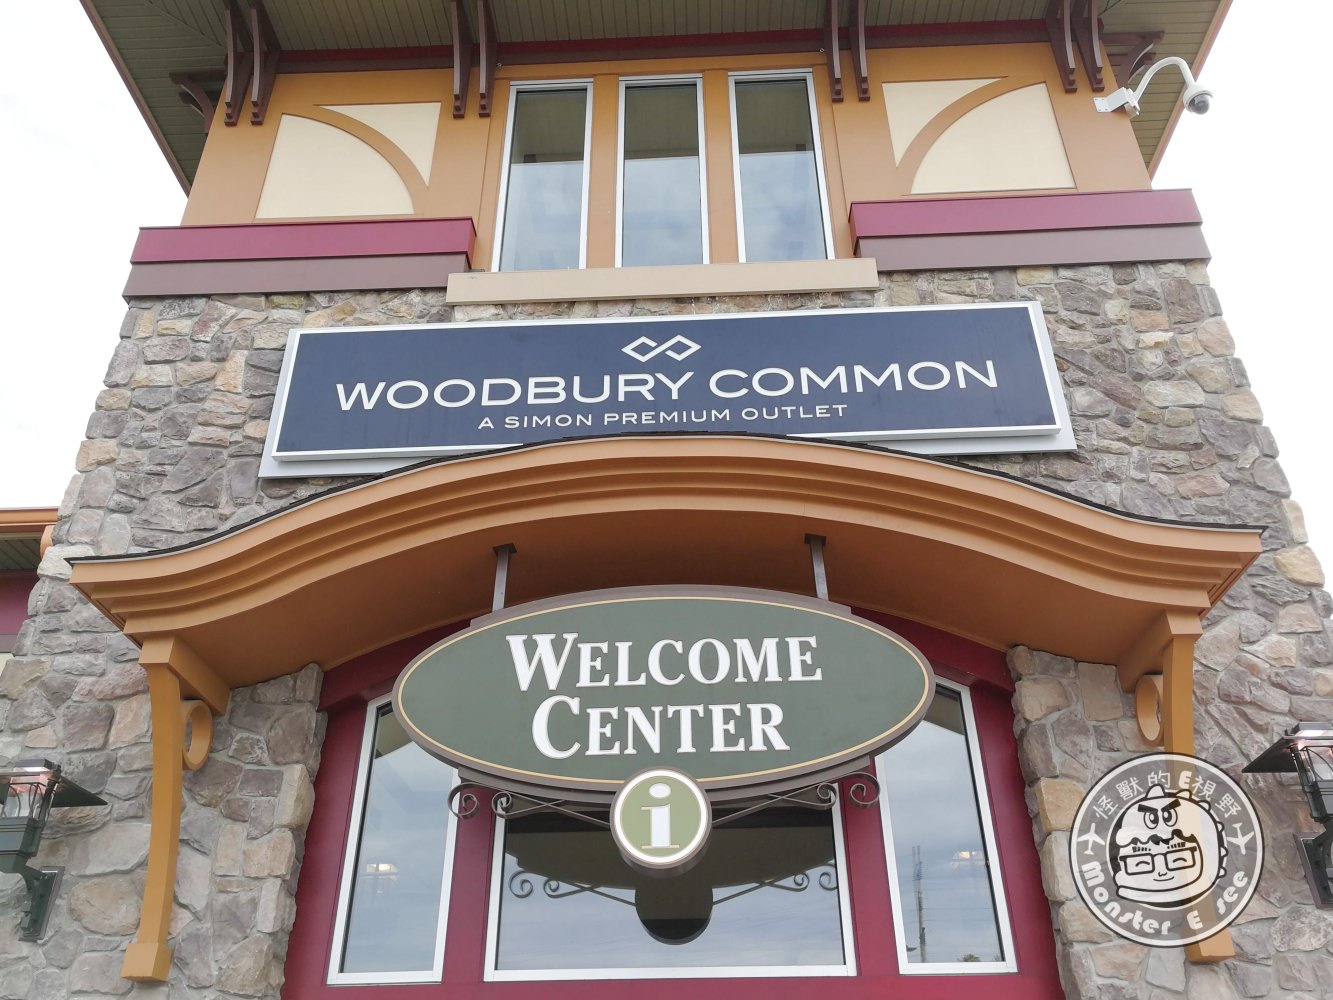 Woodbury Common Premium Outlets9